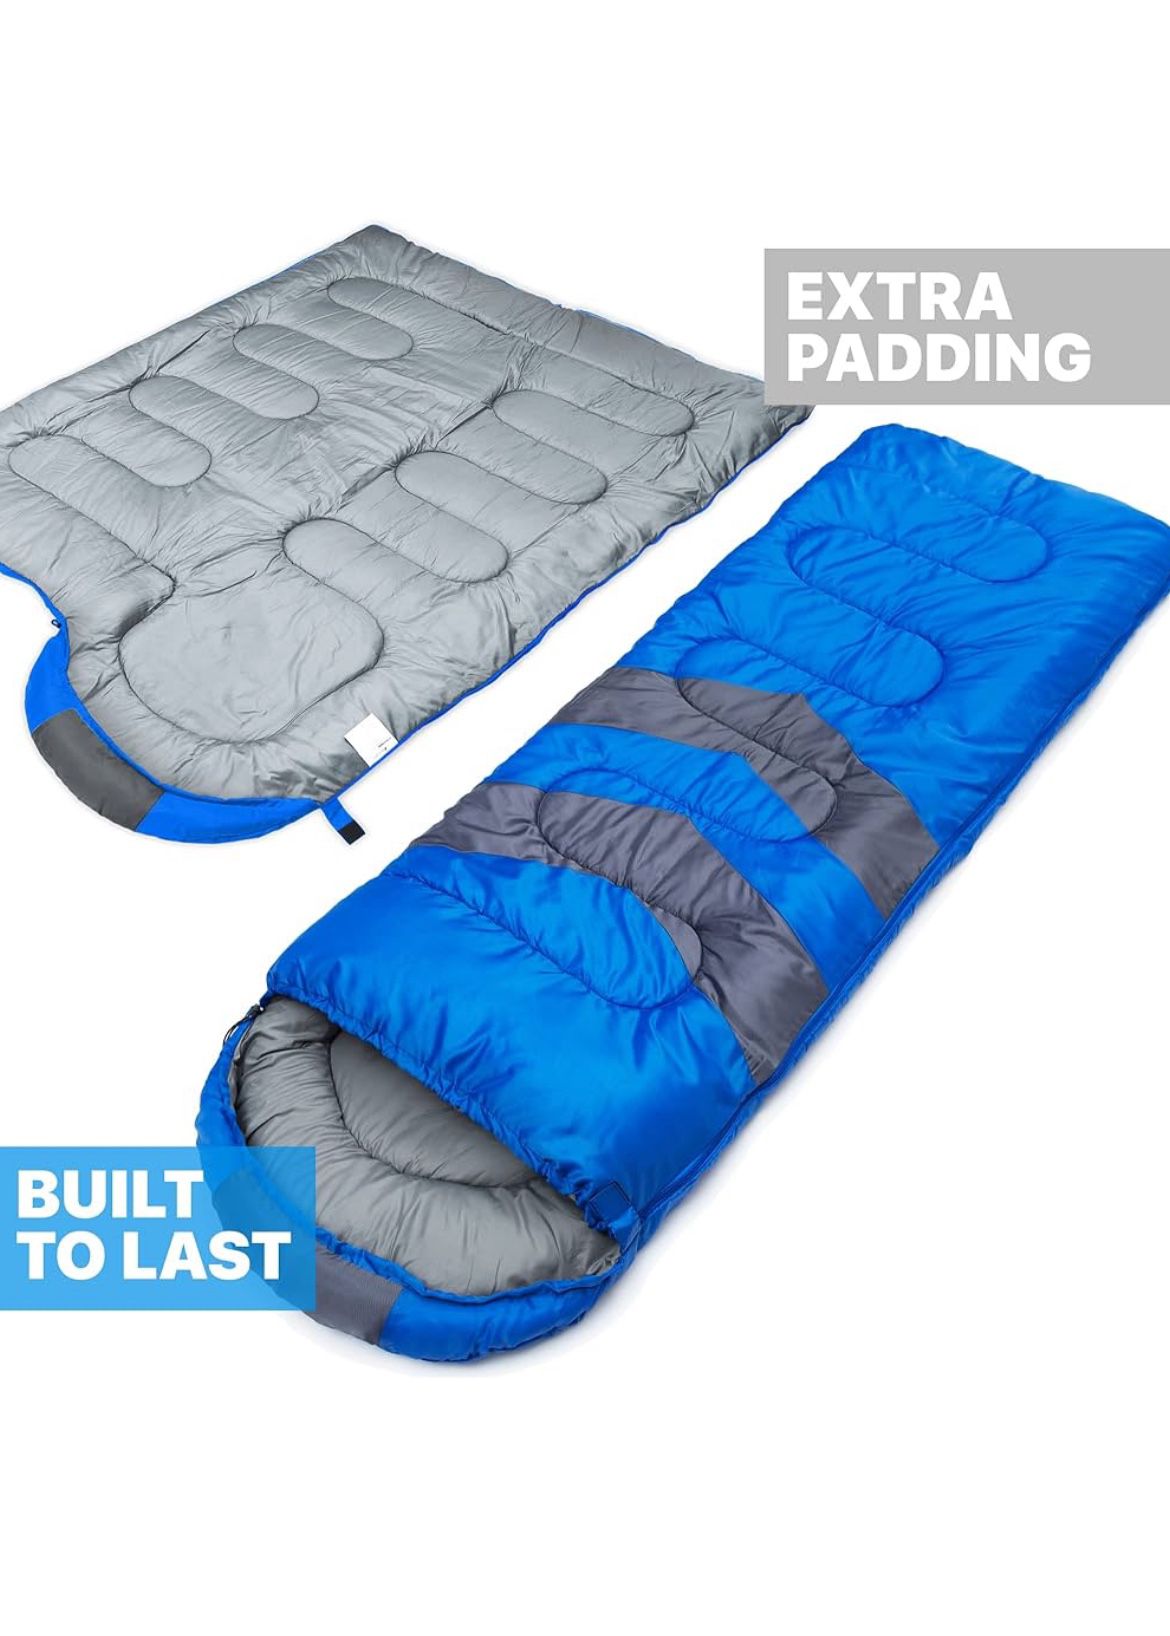 Blue Lightweight Cold Weather & Warm - Backpacking Camping Sleeping Bag for Kids/Adults, NEW